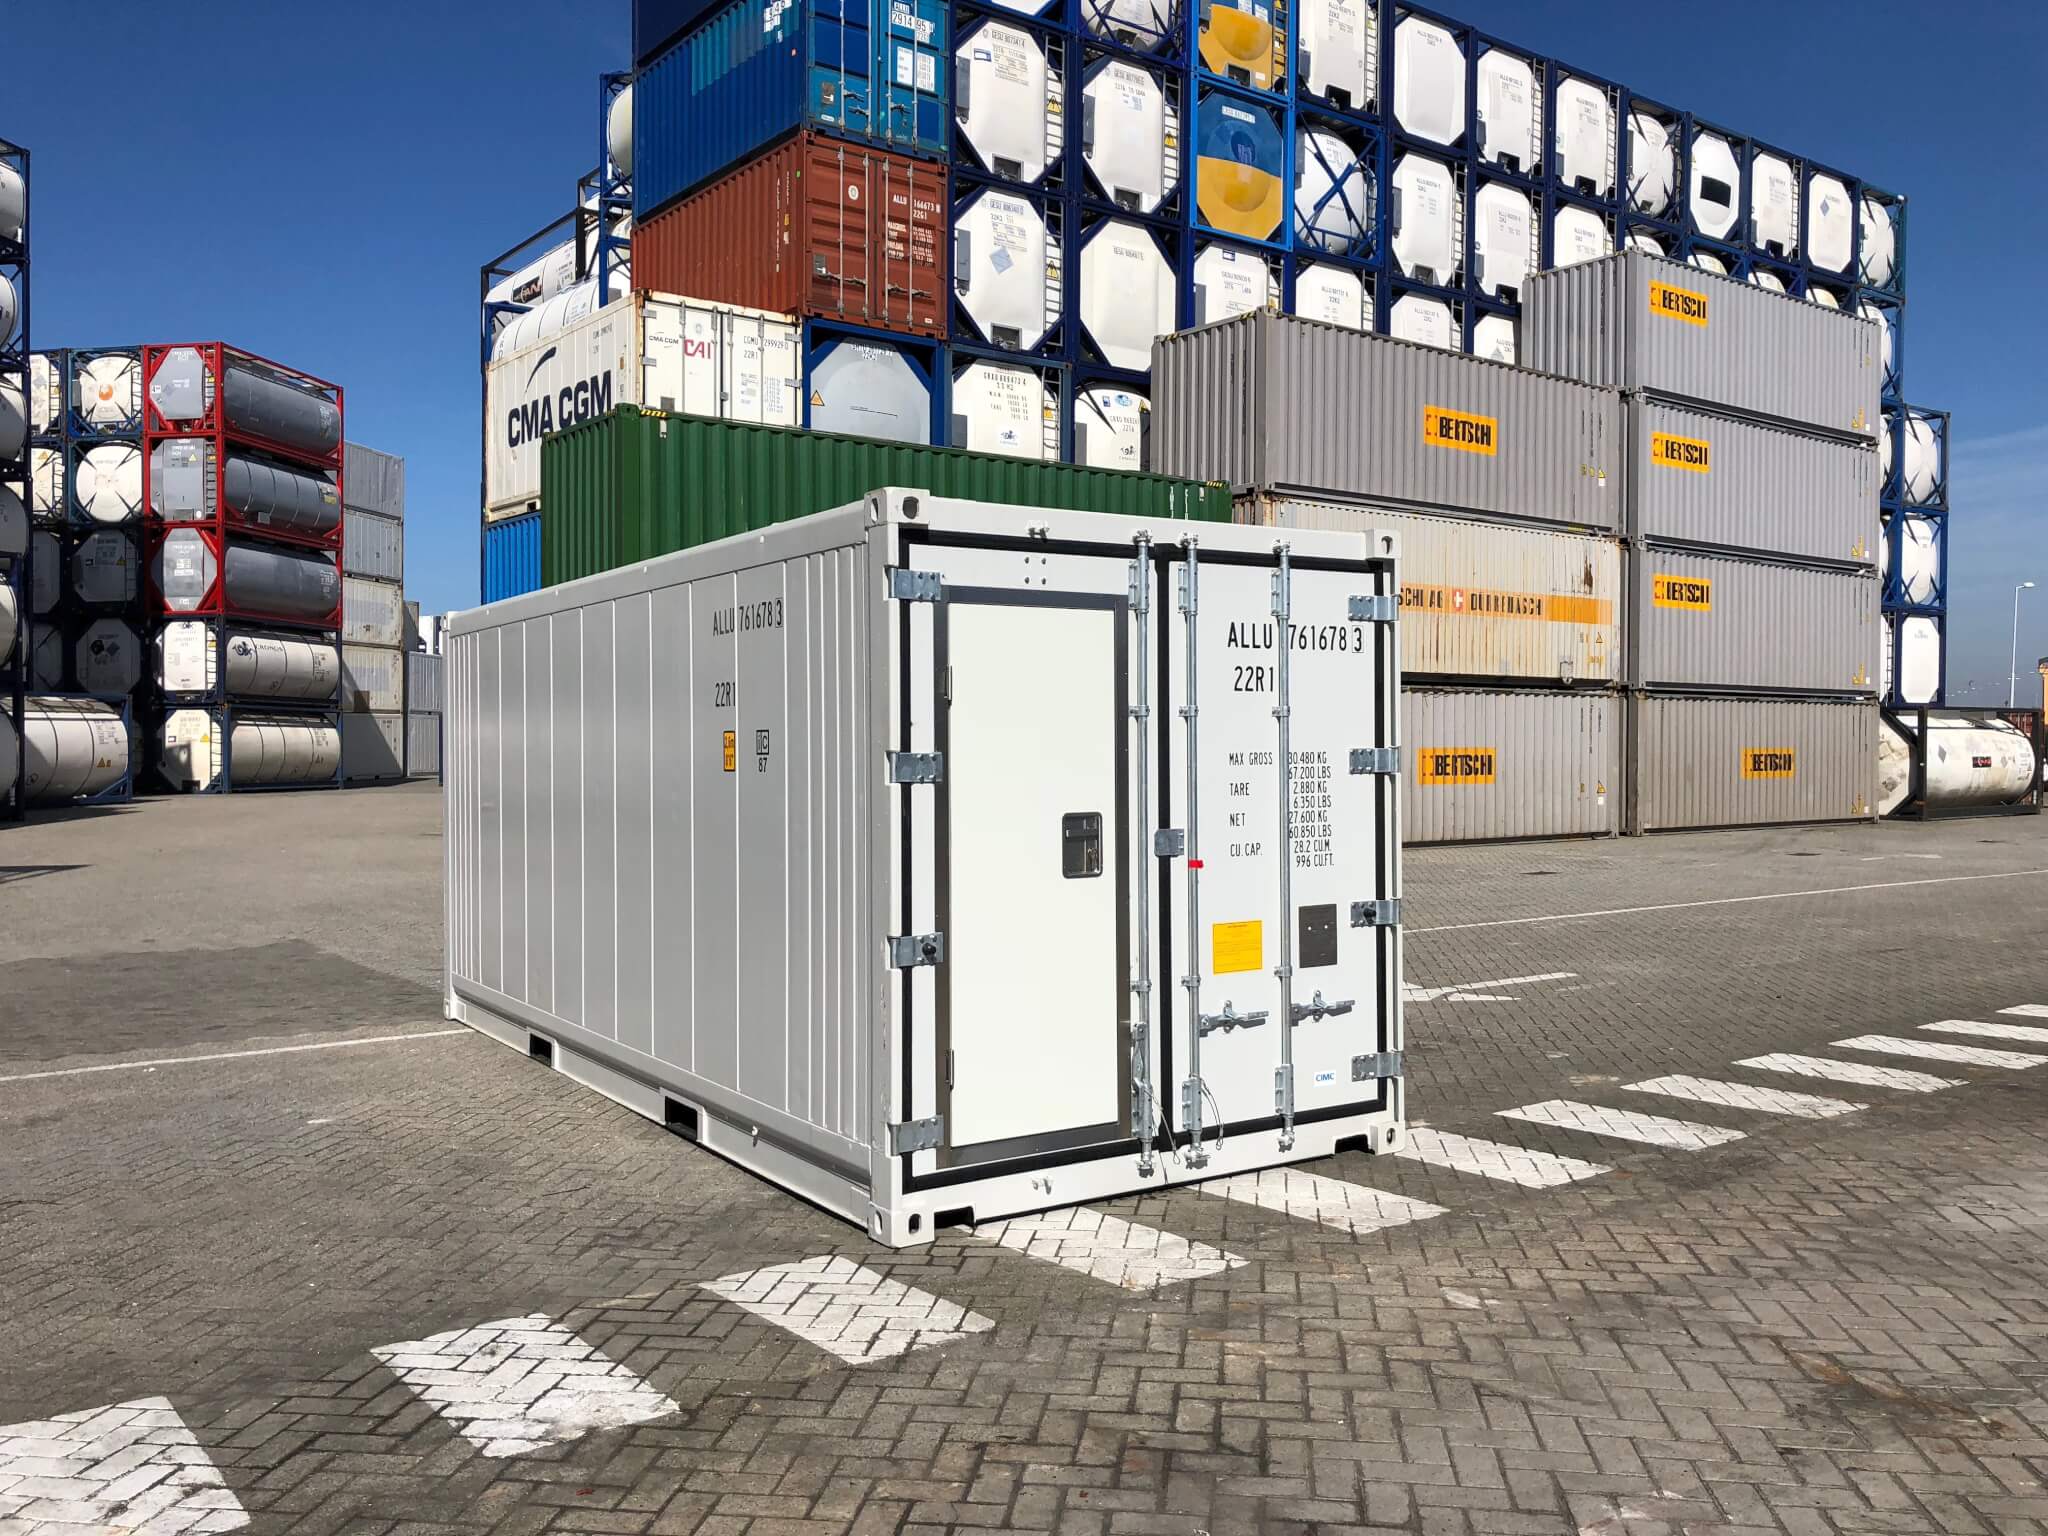 Alconet kan alle types containers ombouwen